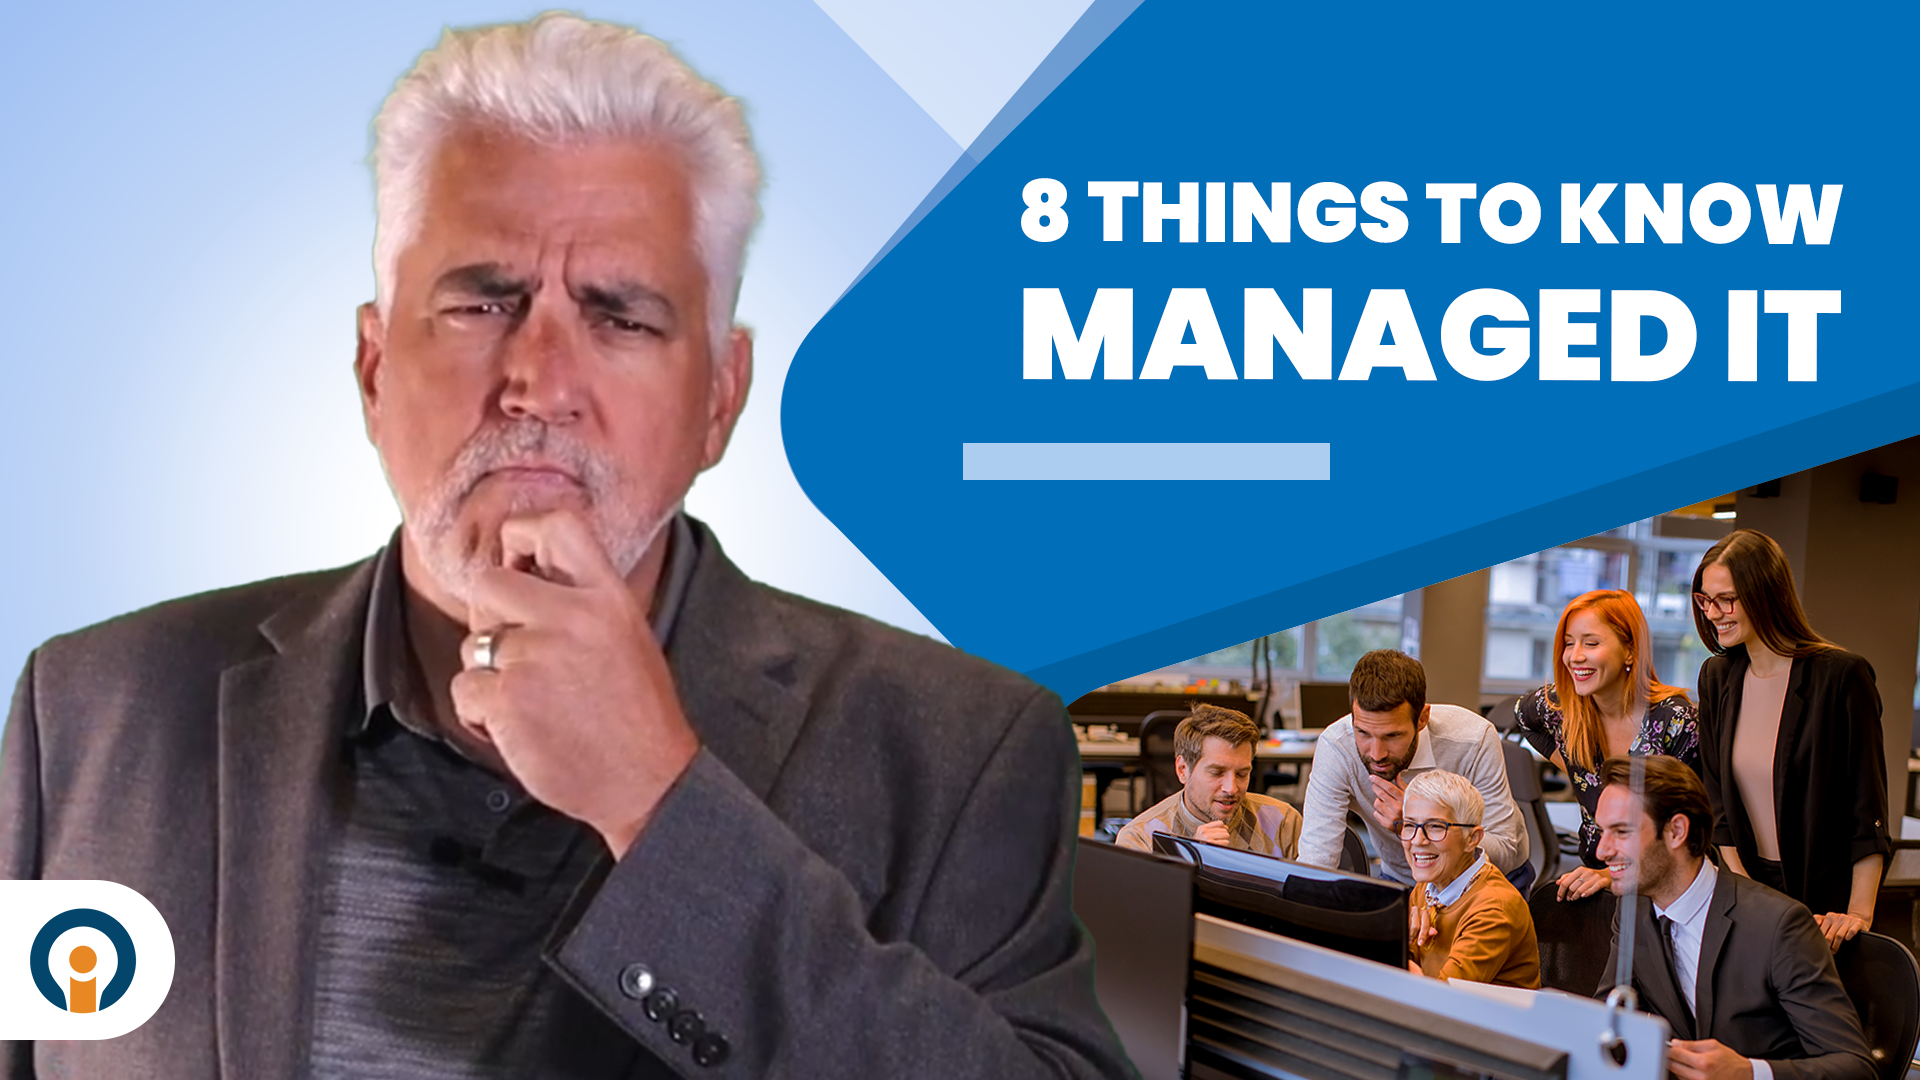 8 Things to Know About Managed IT